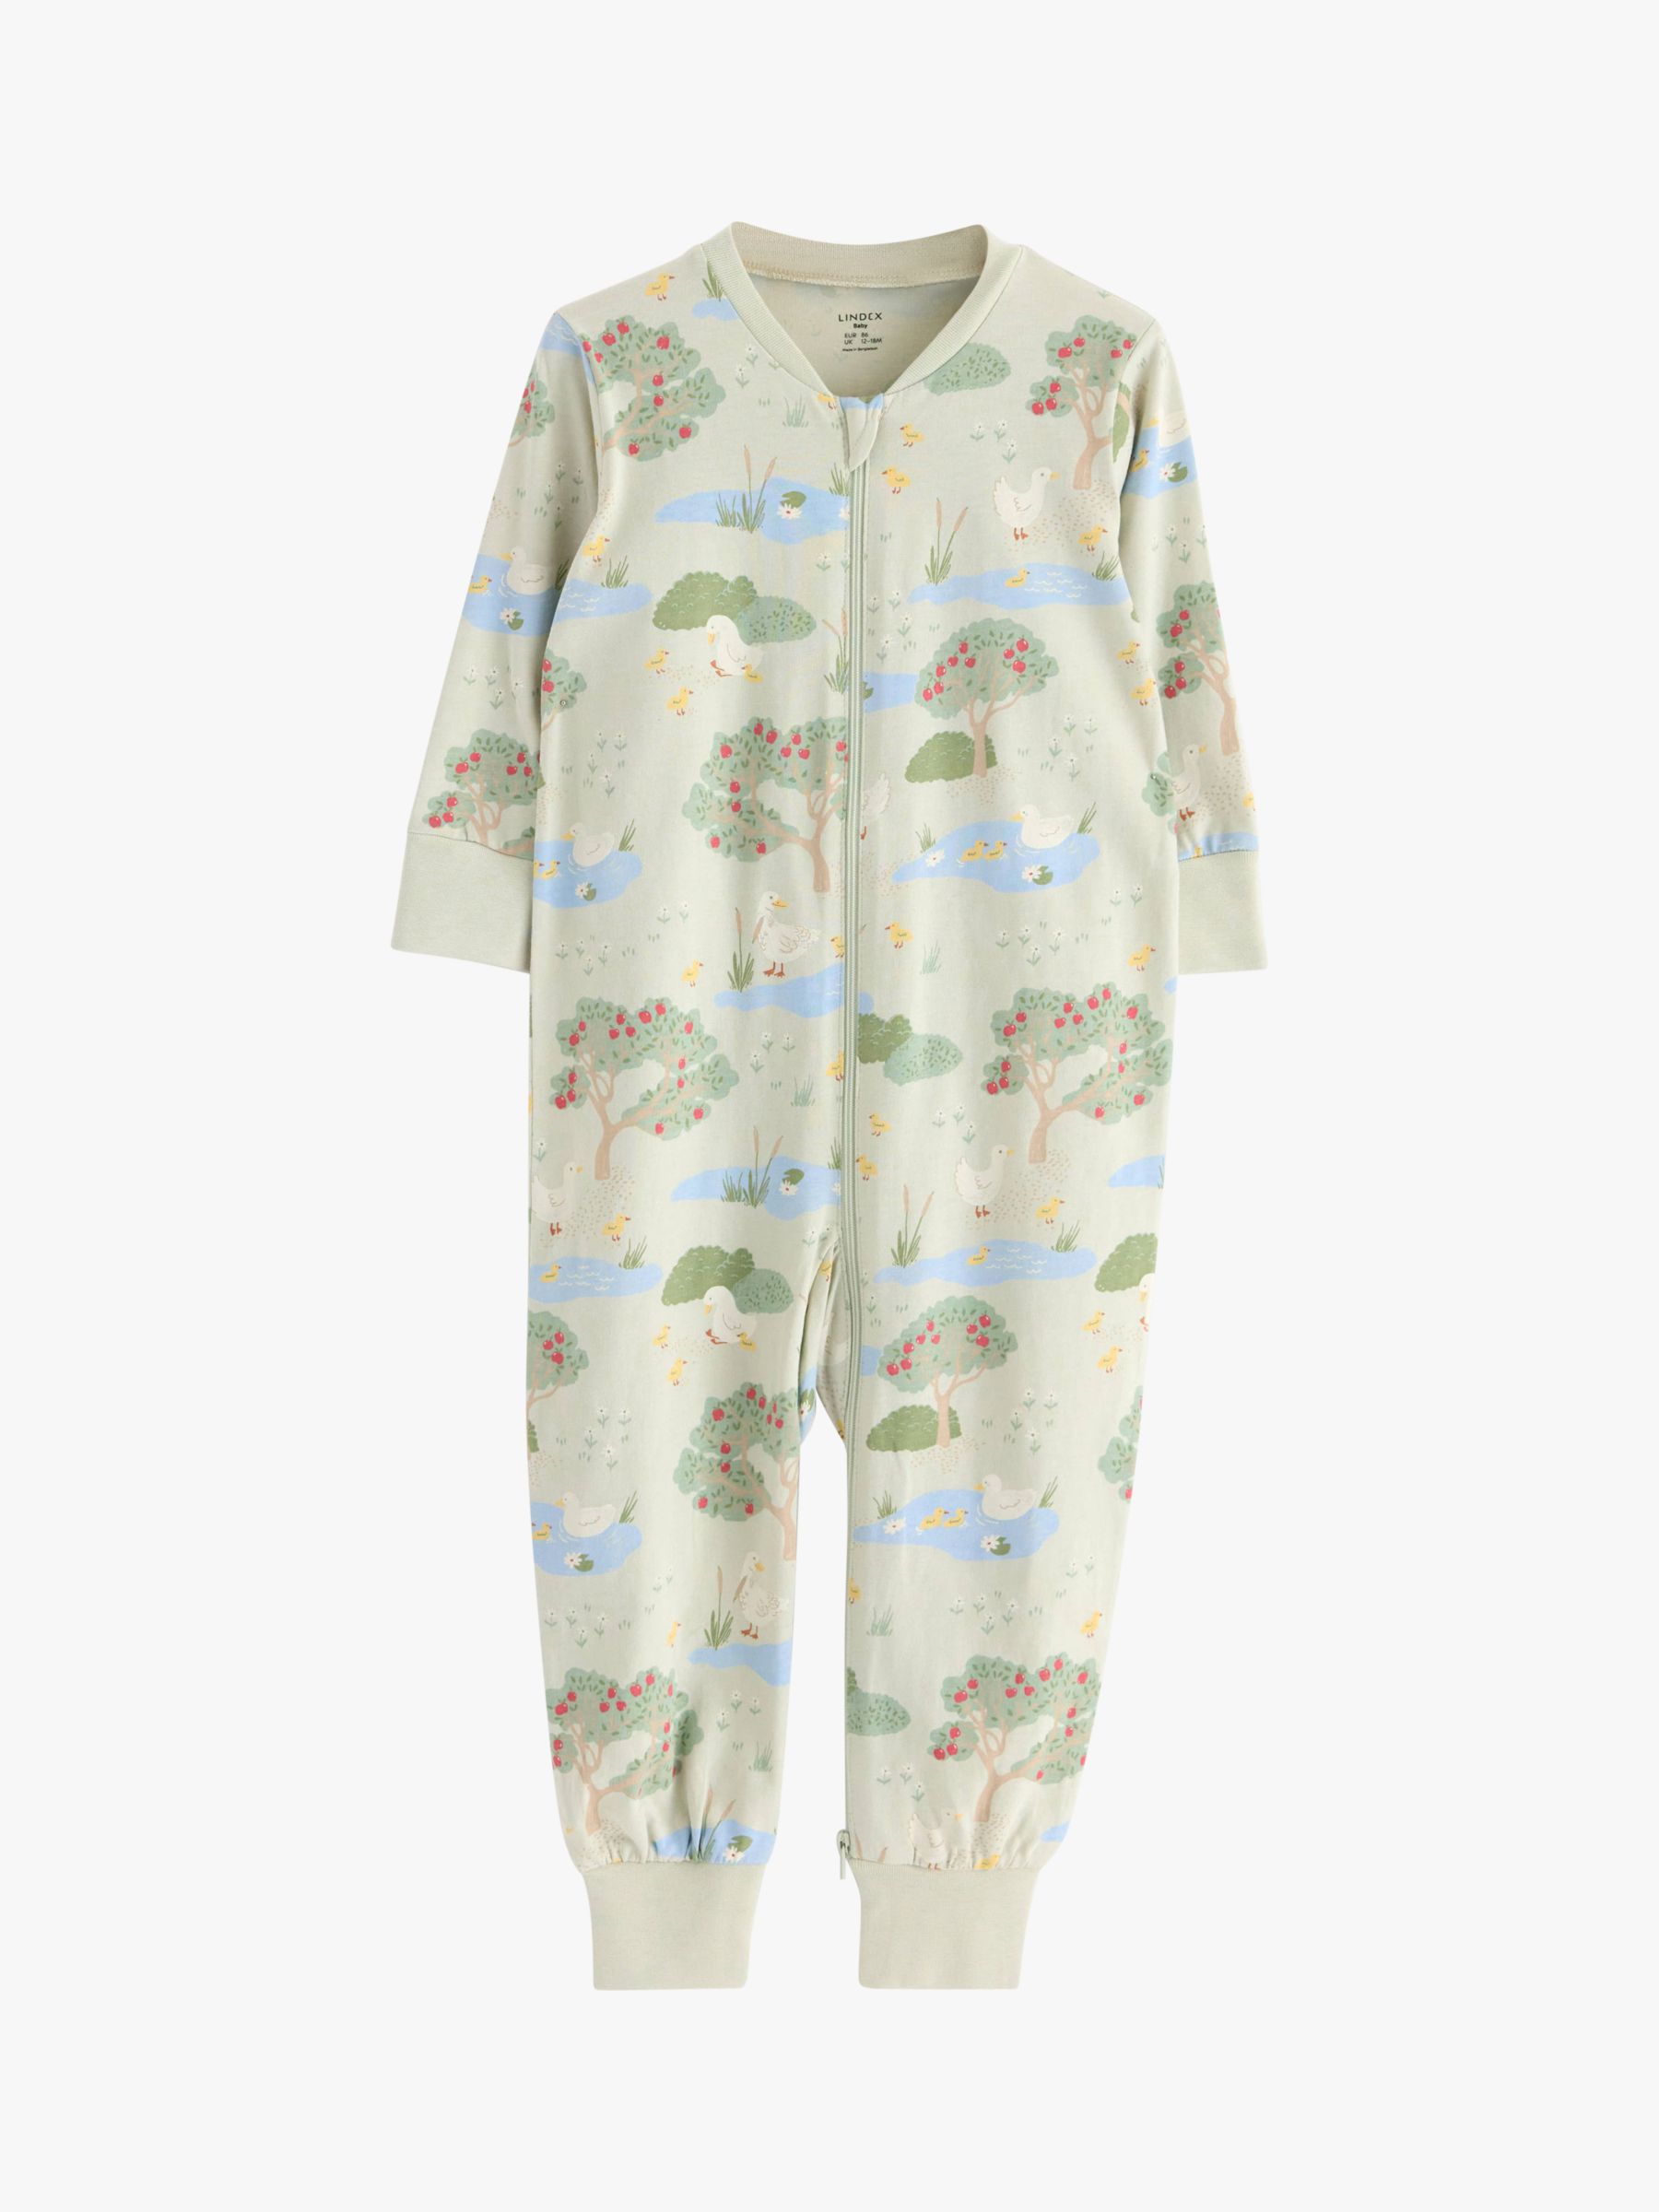 Lindex Baby Organic Cotton Landscape Print All-in-One Pyjamas, Light Green, 10-12 months